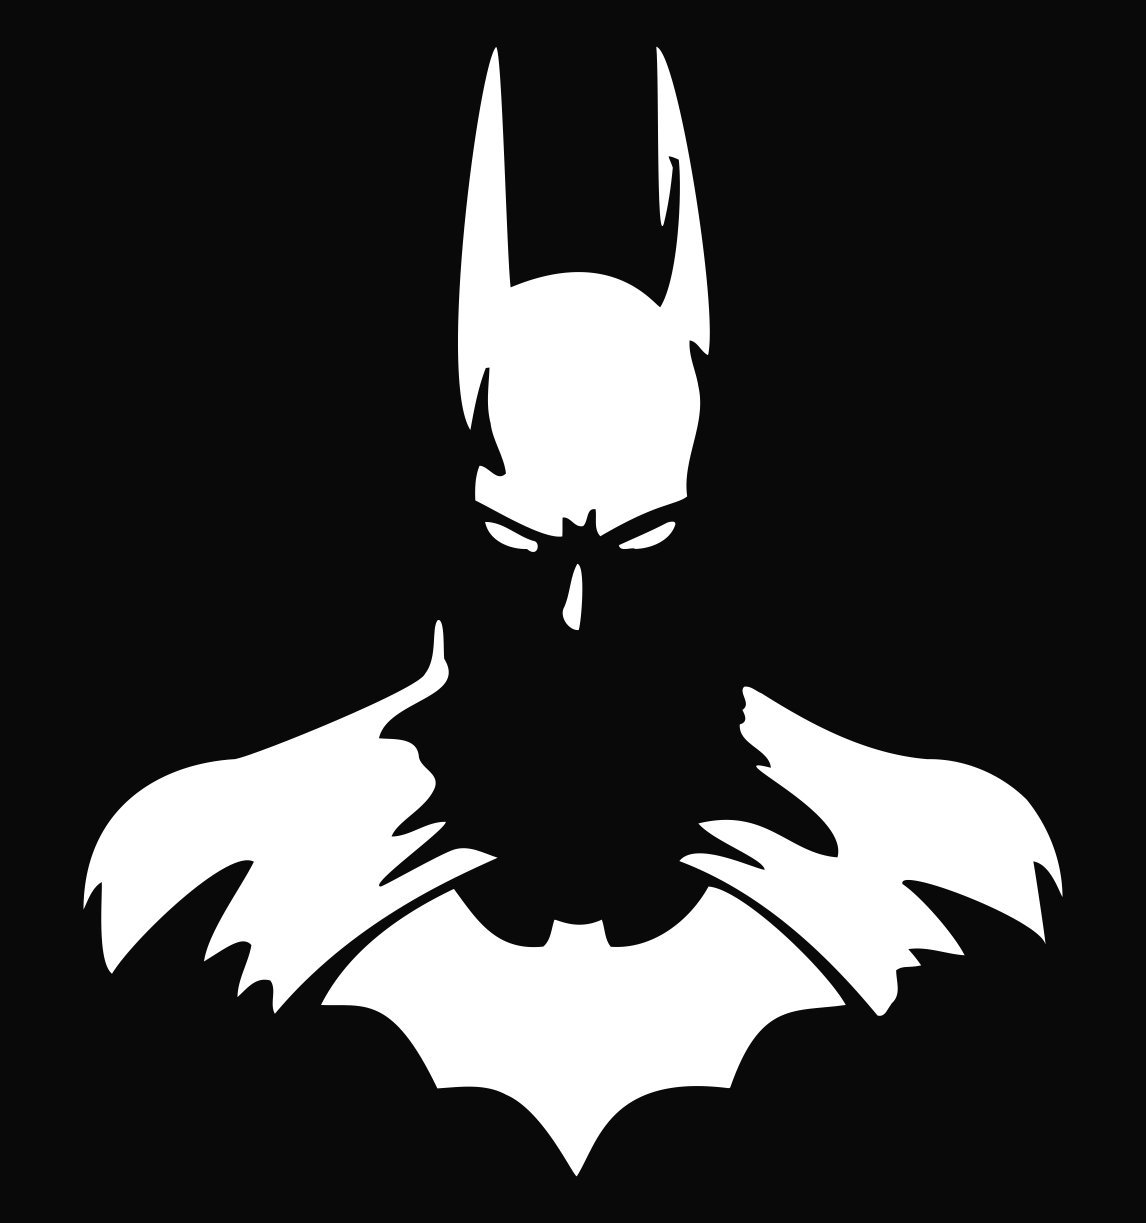  Sci Fi Decorations and Geek Gifts Batman Vinyl Decal 6 inch   White 1146x1223